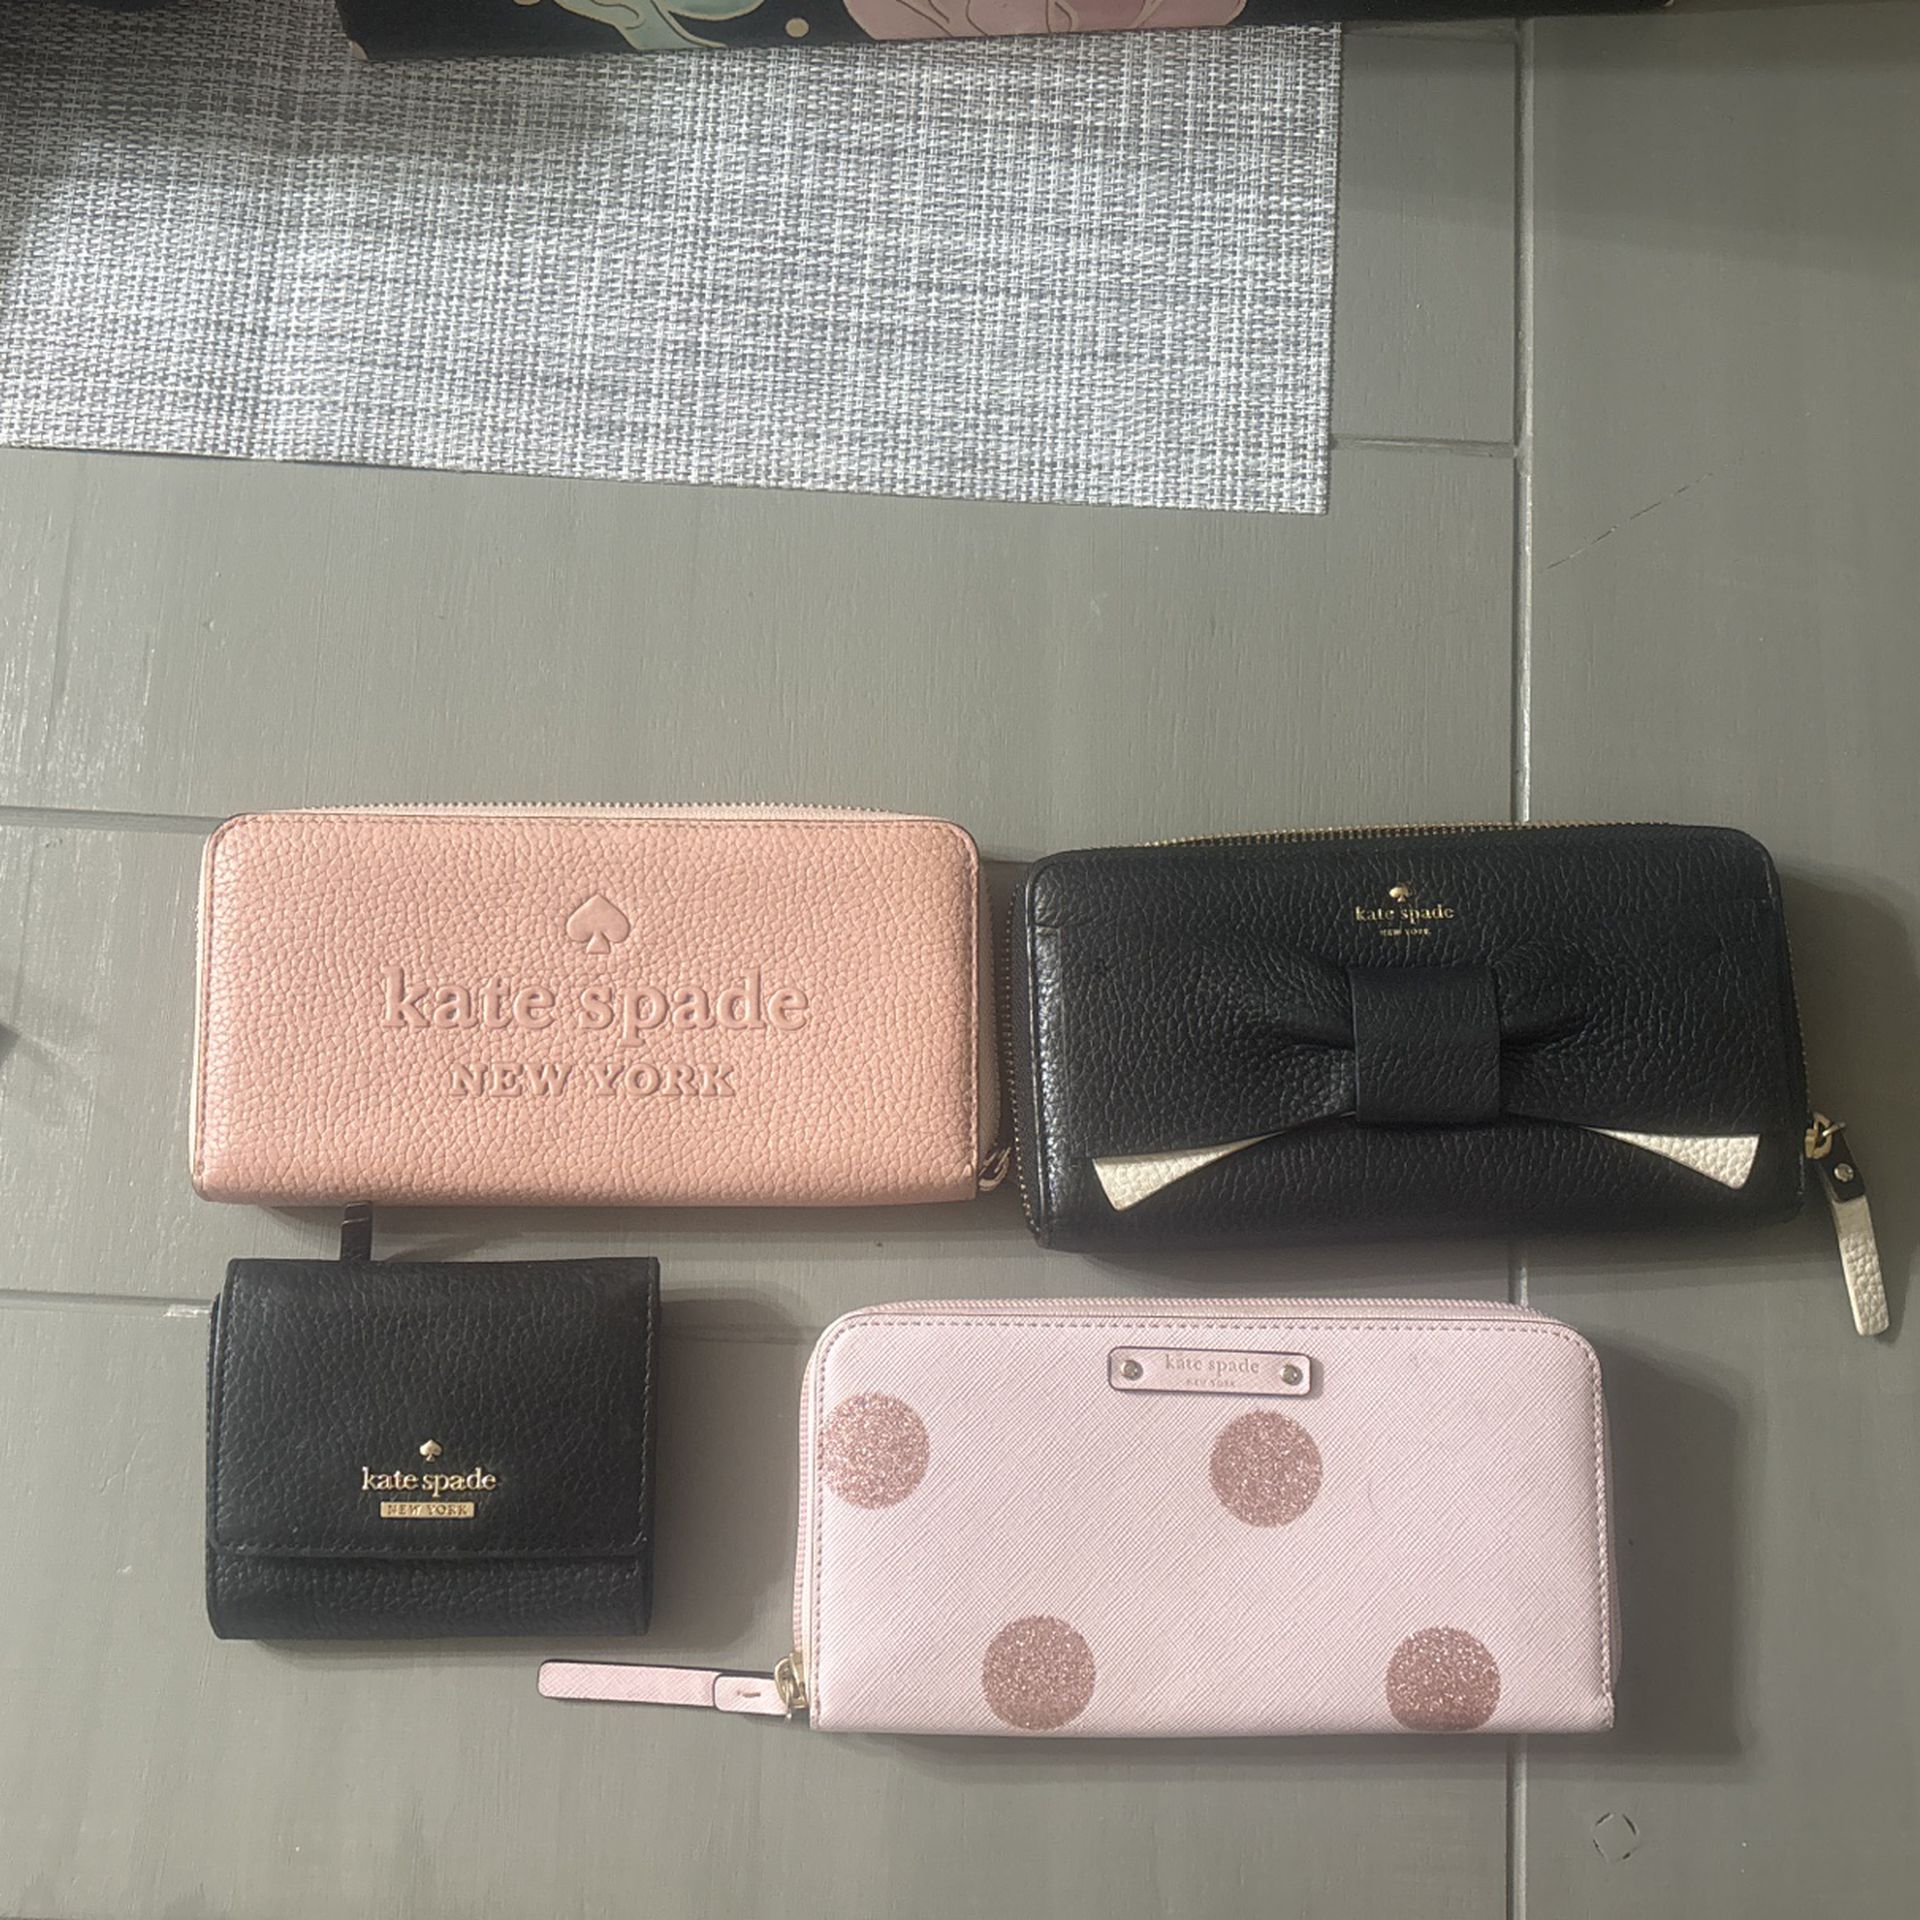 Kate Spade Wallets Good Condition 